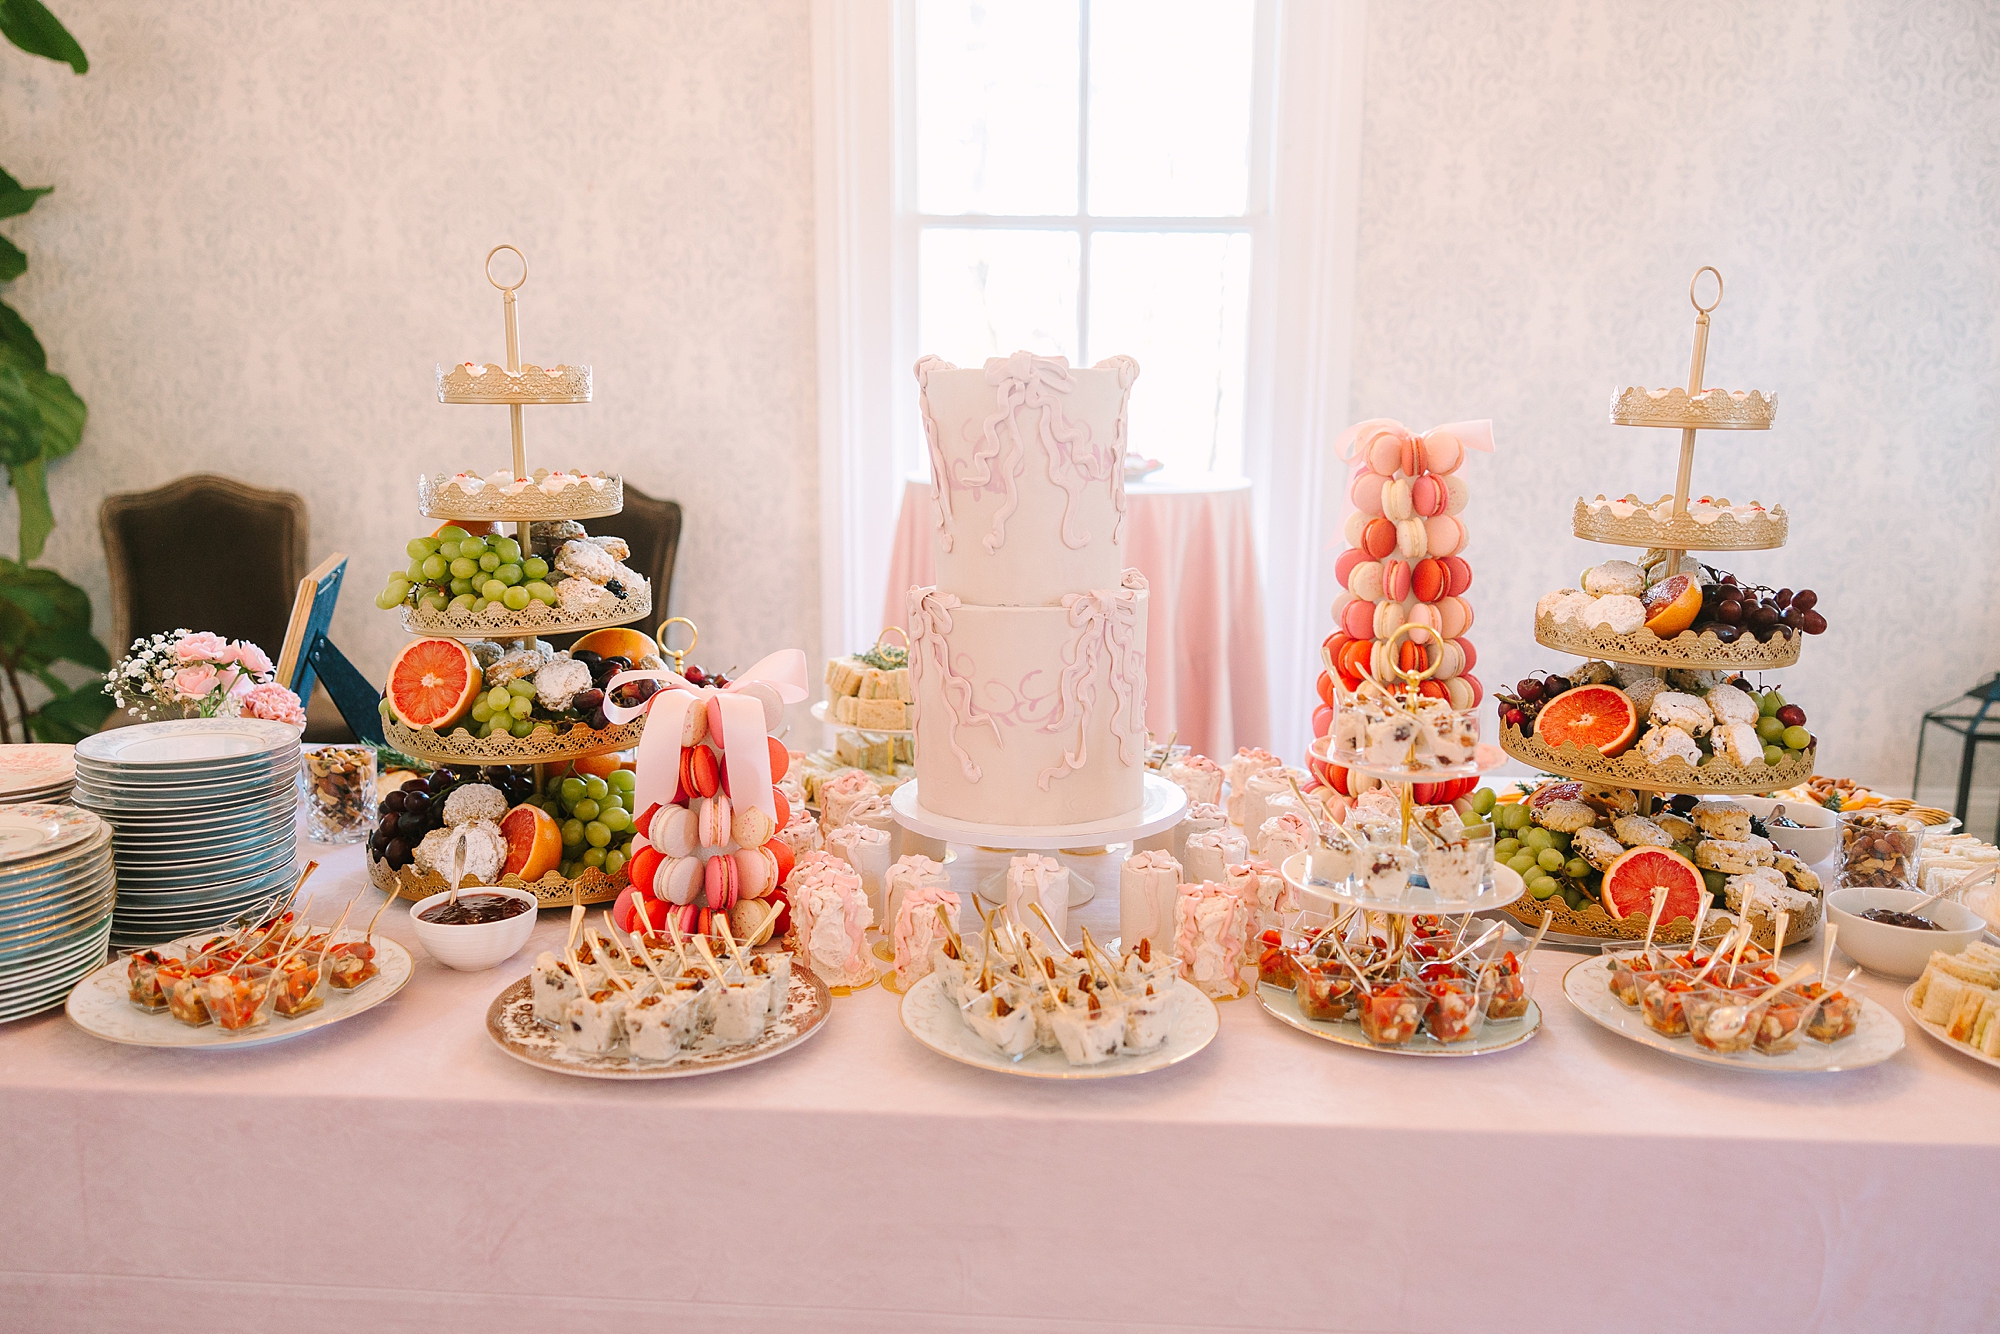 dessert display with cake and other desserts at Galentine's Day Tea